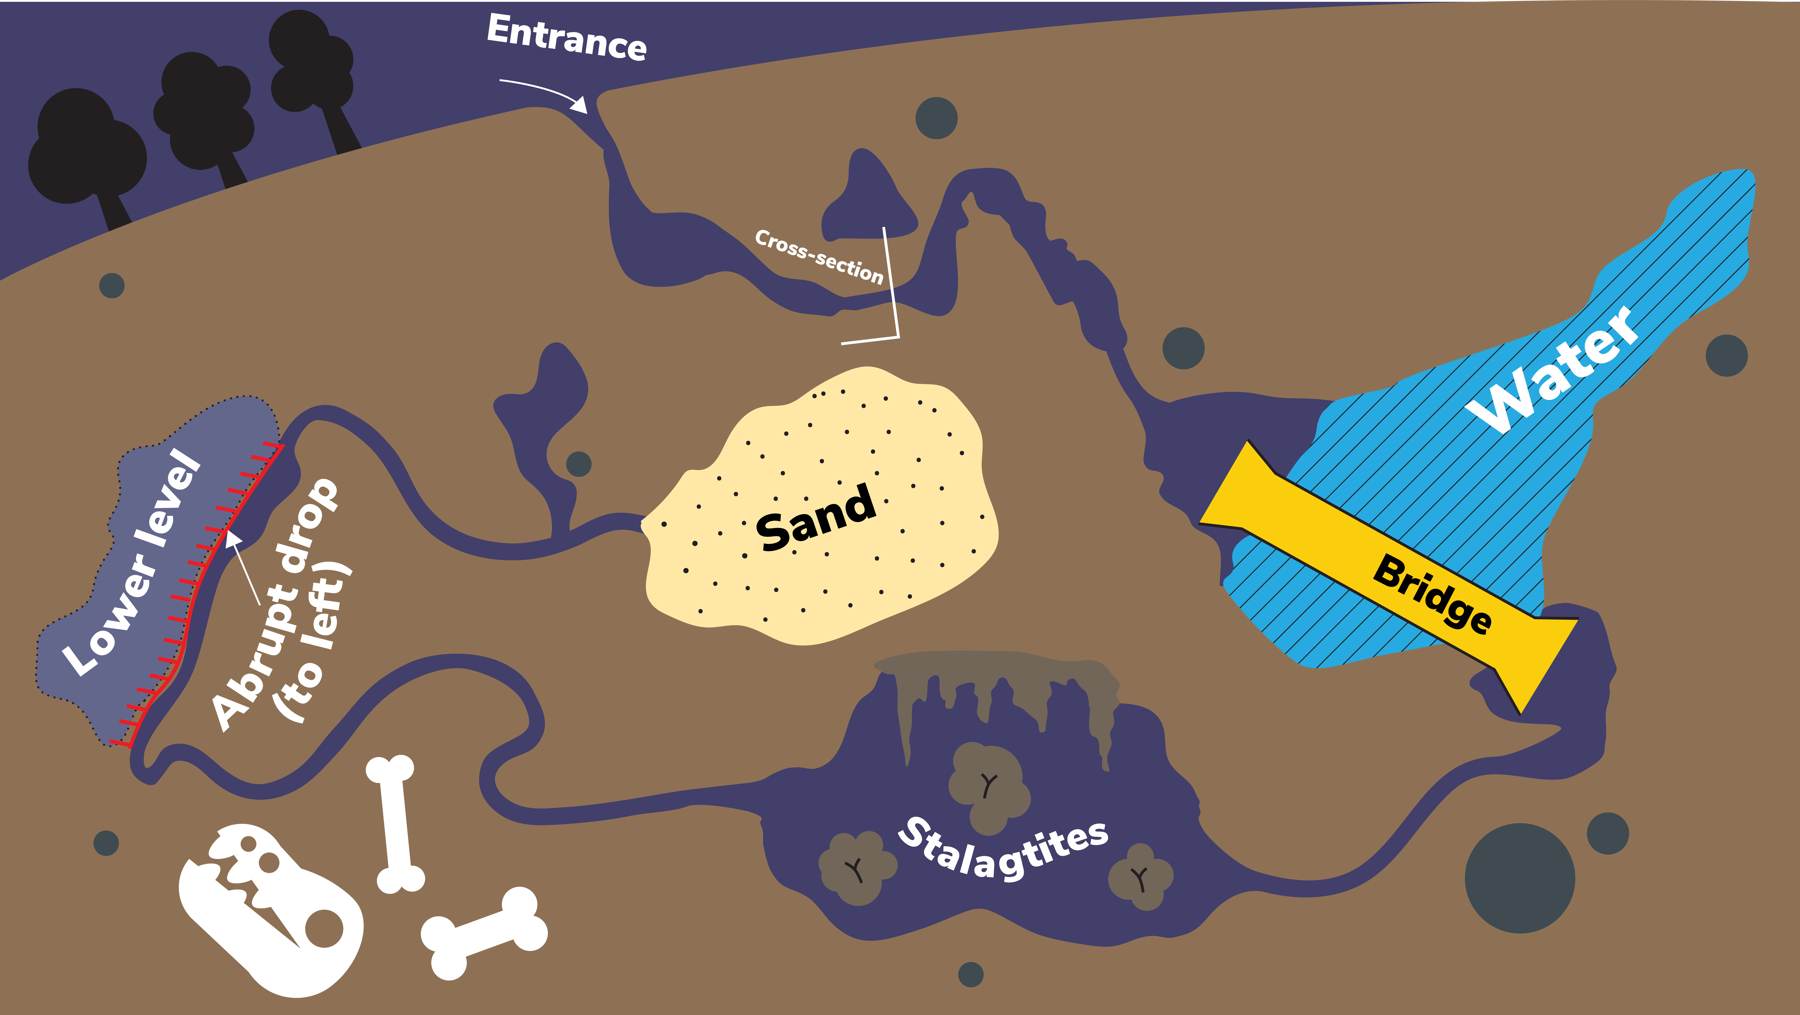 An example drawing of a cave map; with features including sand, water, bridge, stalactites, a lower level and a cross section.